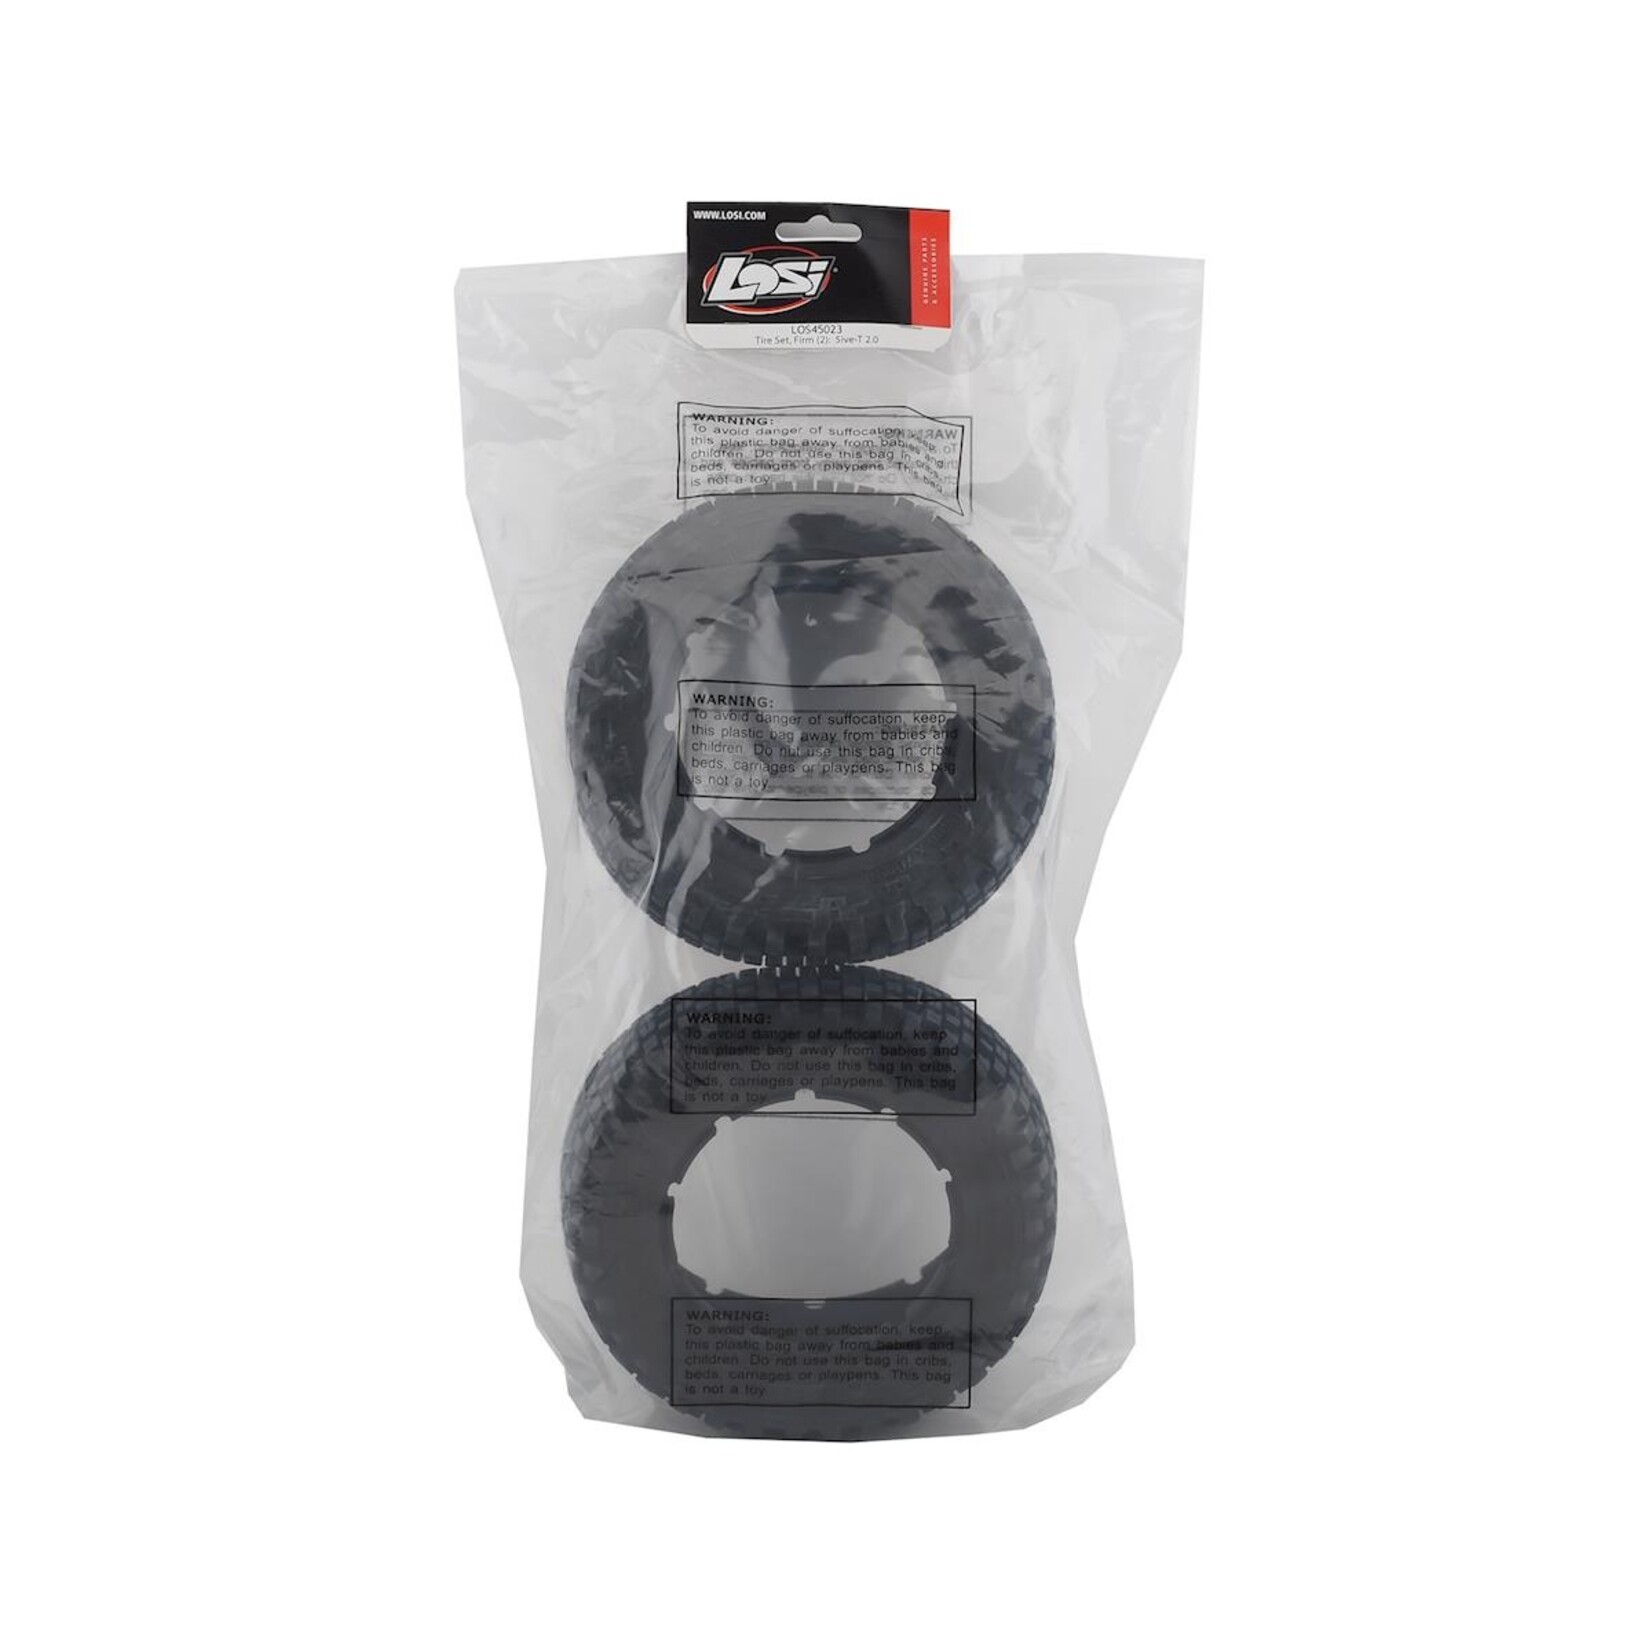 Losi Losi 5IVE-T 2.0 1/5 Scale Tire (Firm) (2) # LOS45023